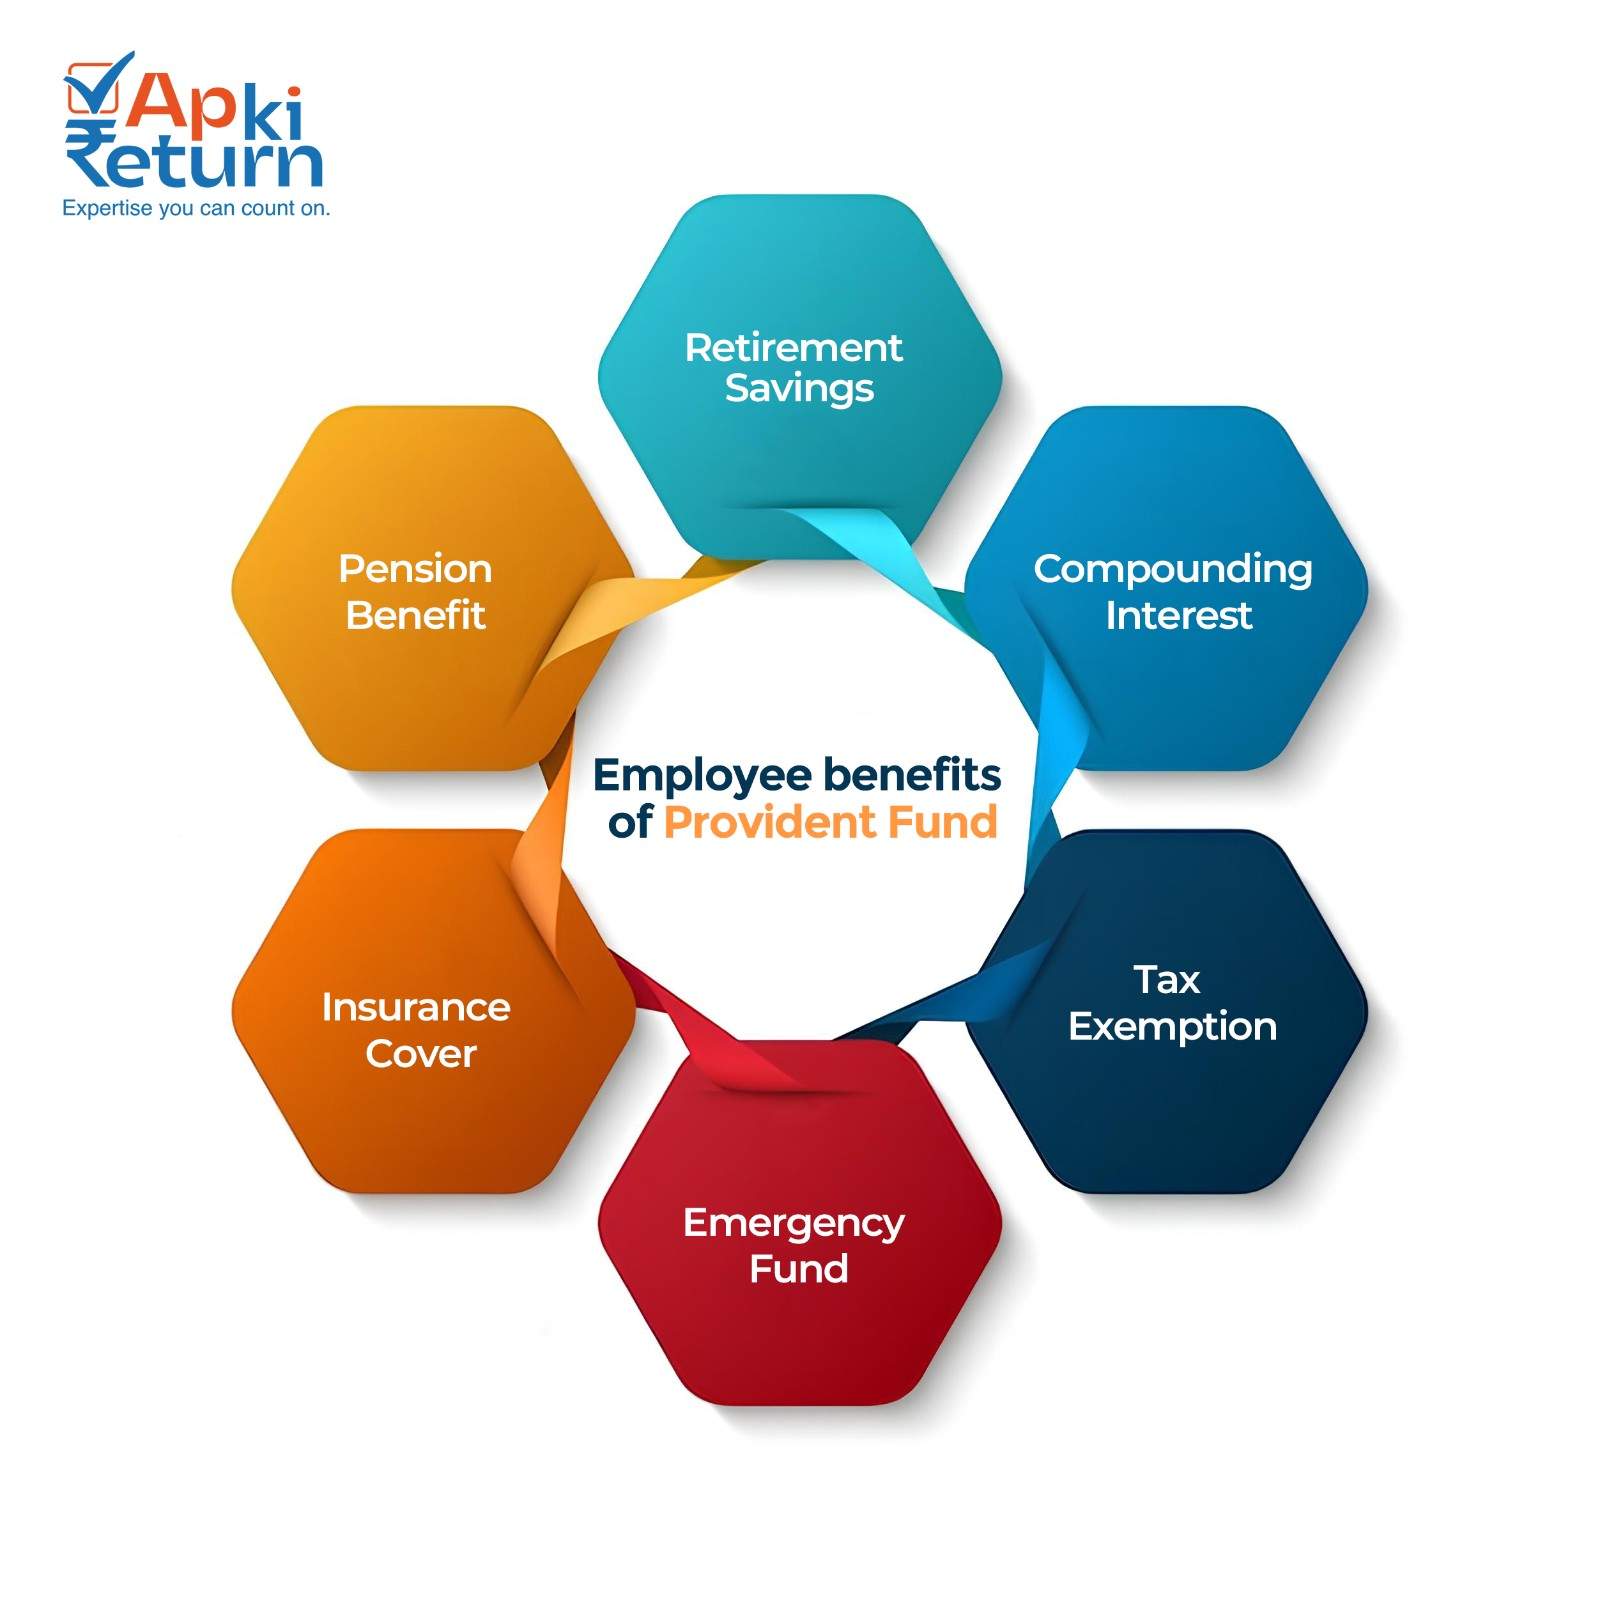 Benefits for Employees